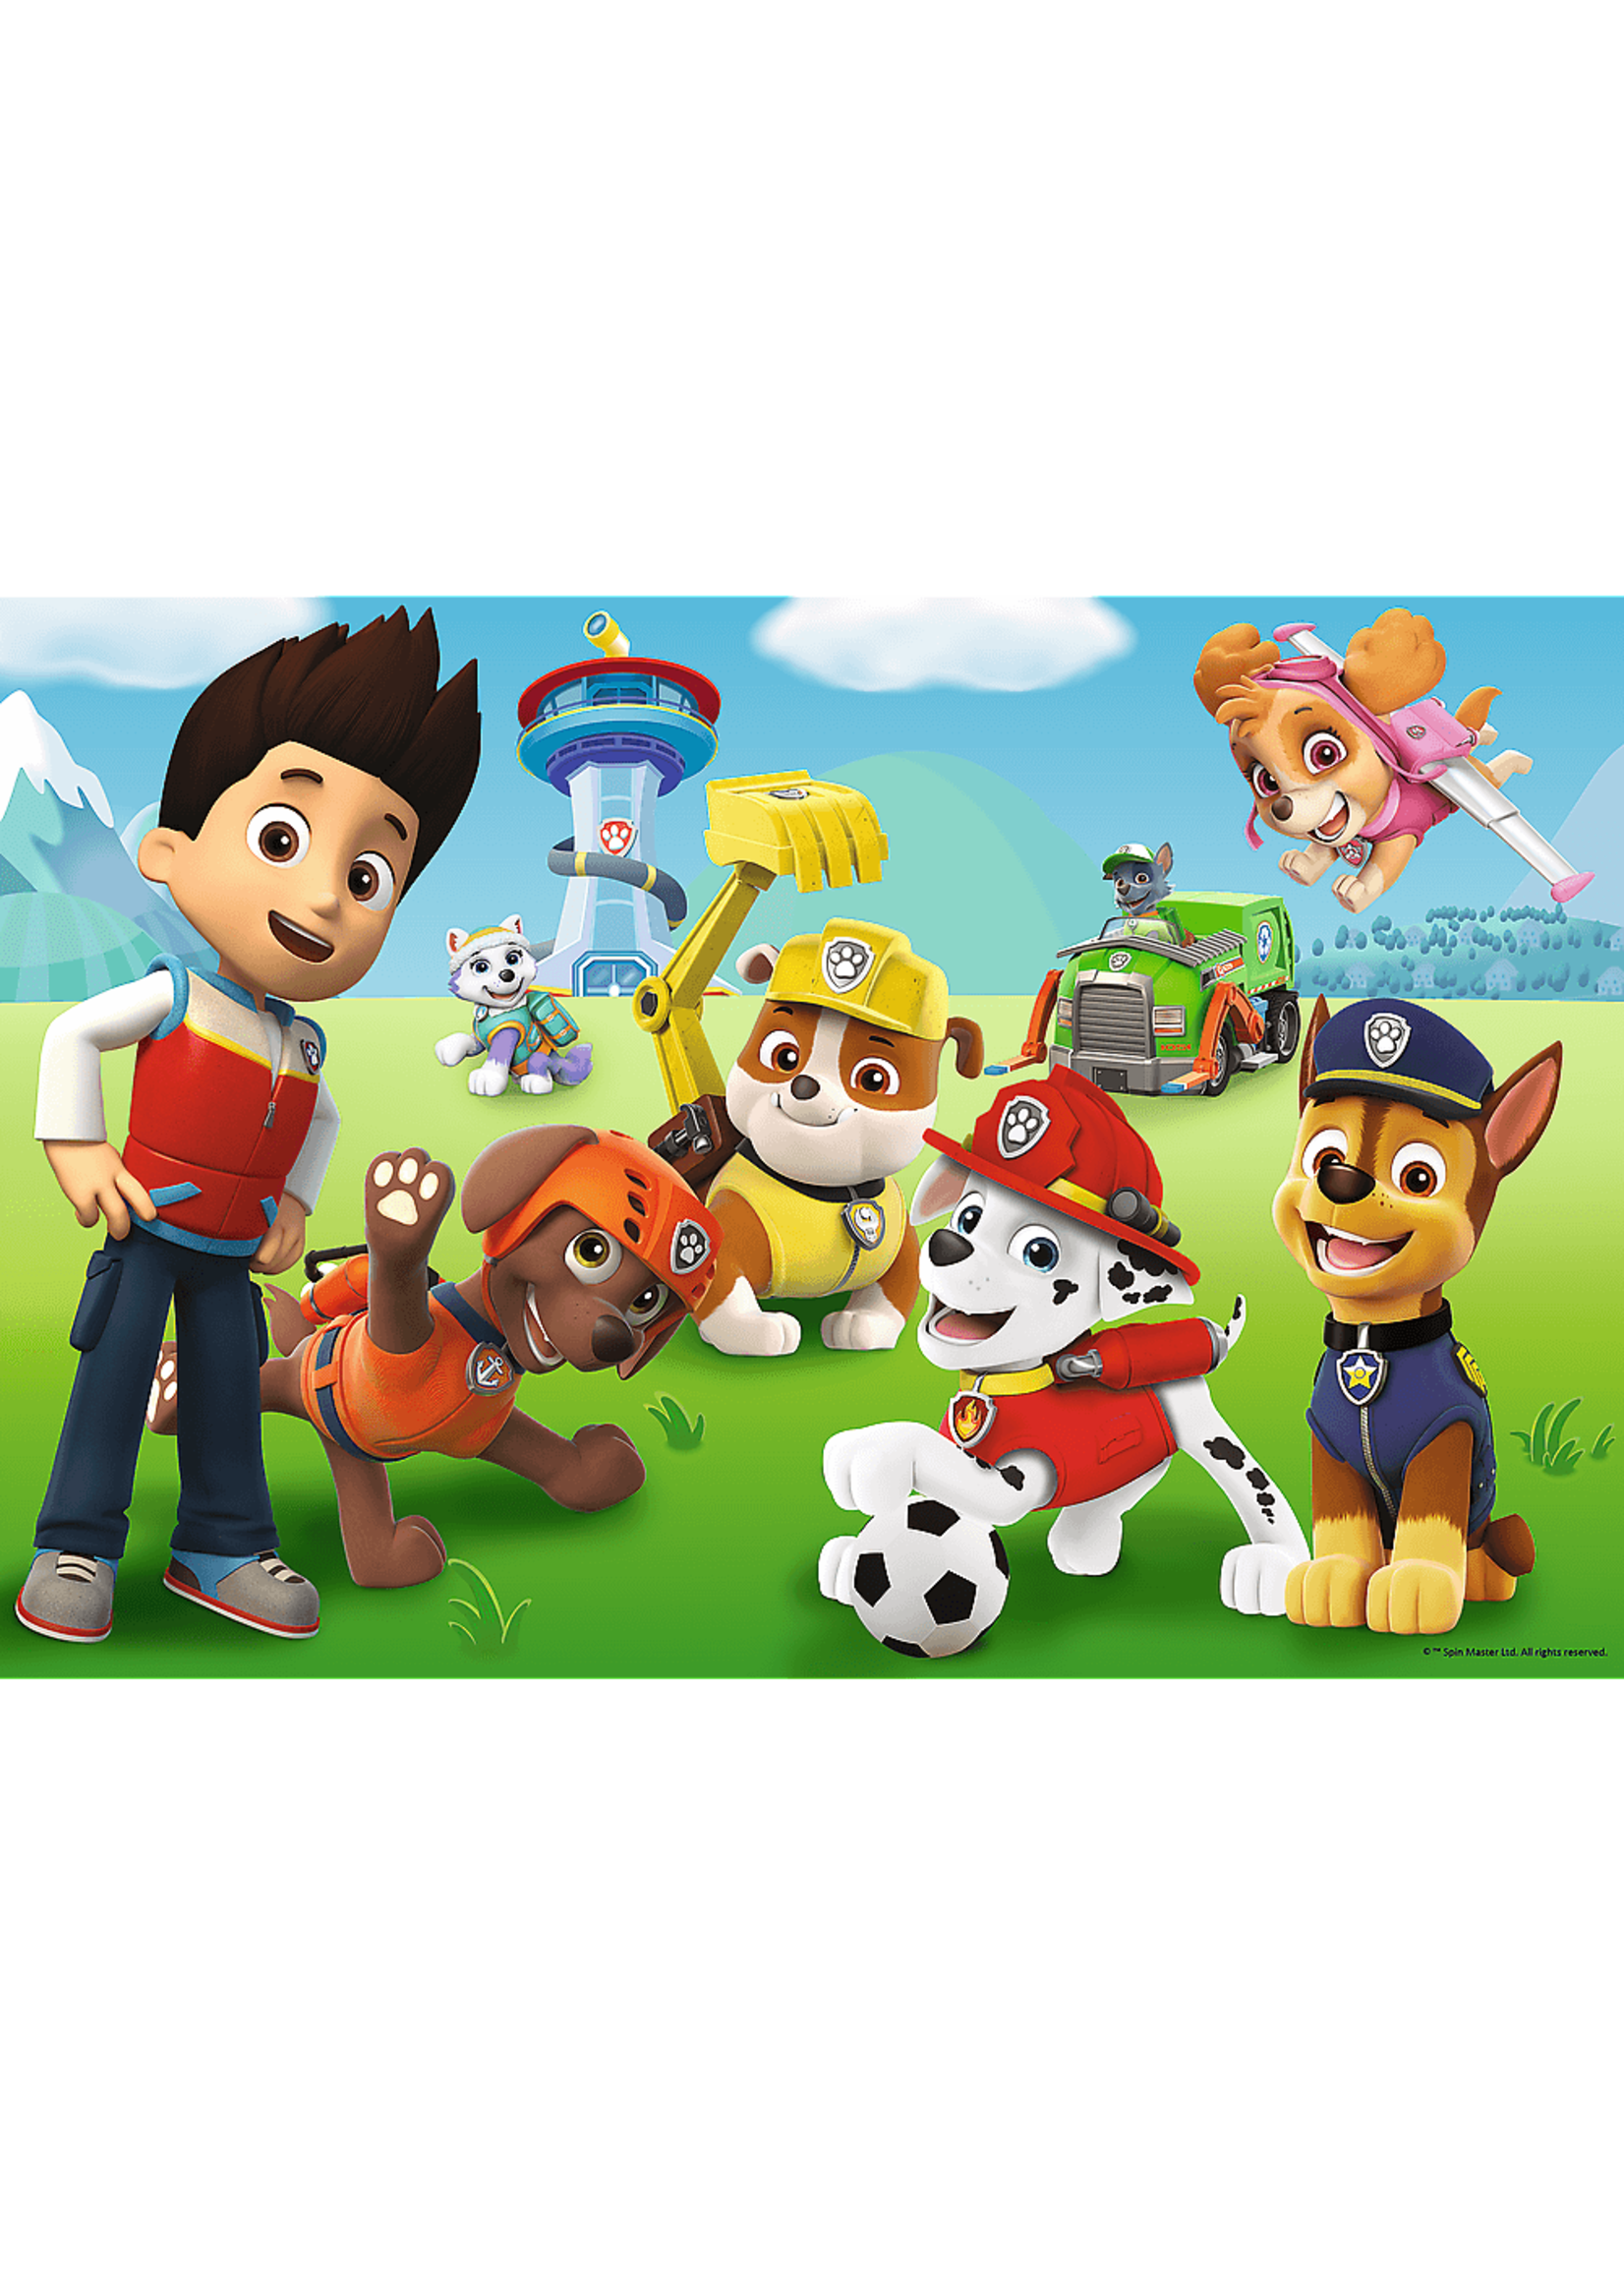 Nickelodeon Paw Patrol puzzle from Nickelodeon